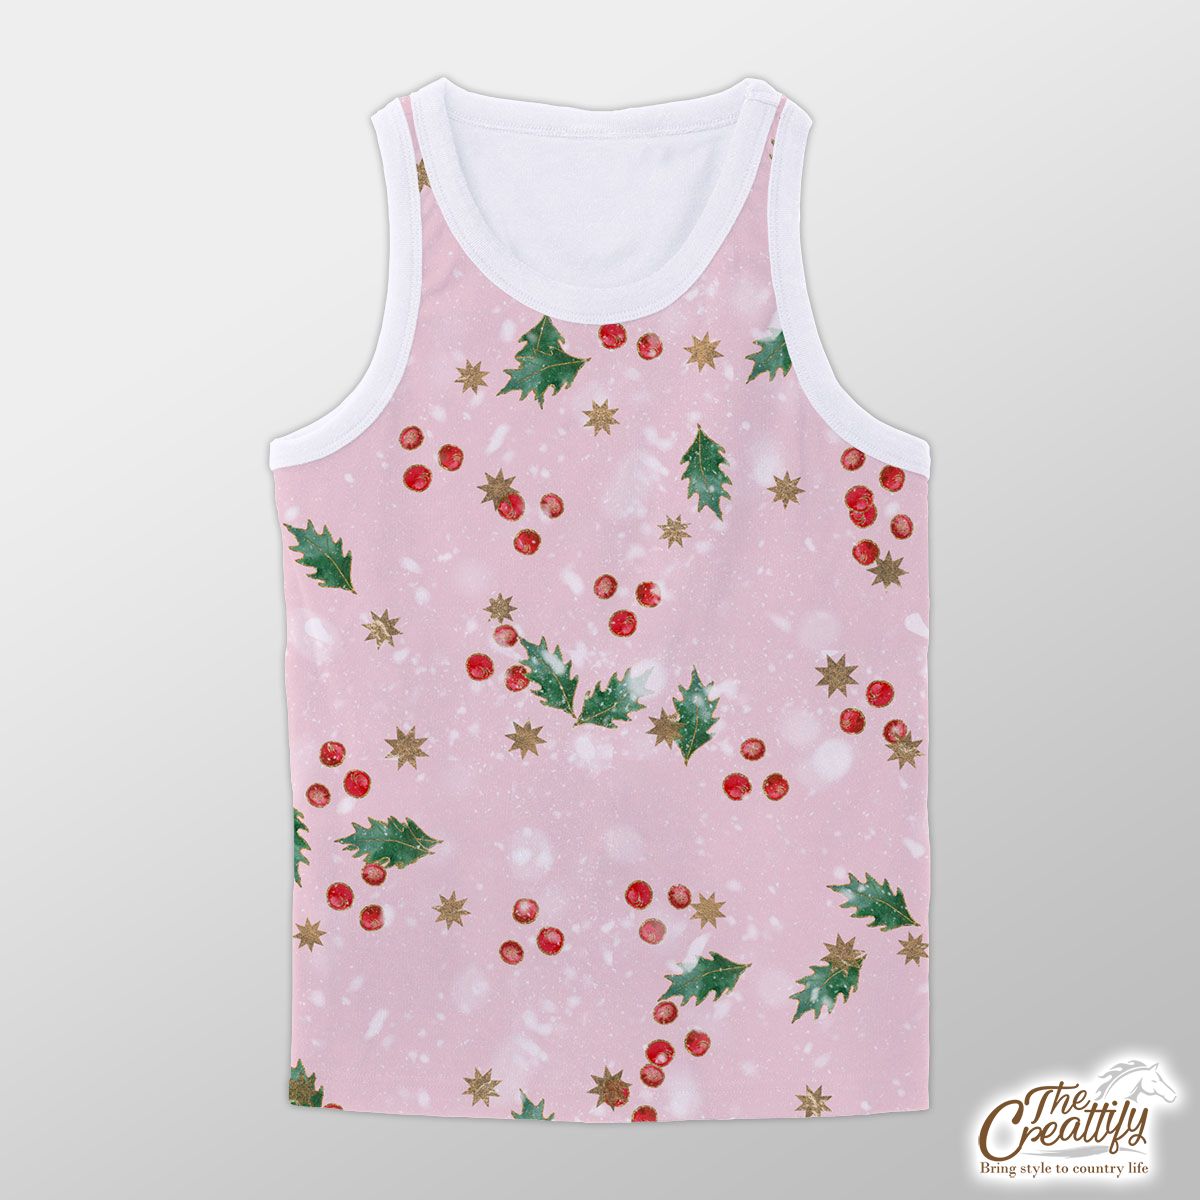 Holly Leaf With Christmas Star Pattern Unisex Tank Top